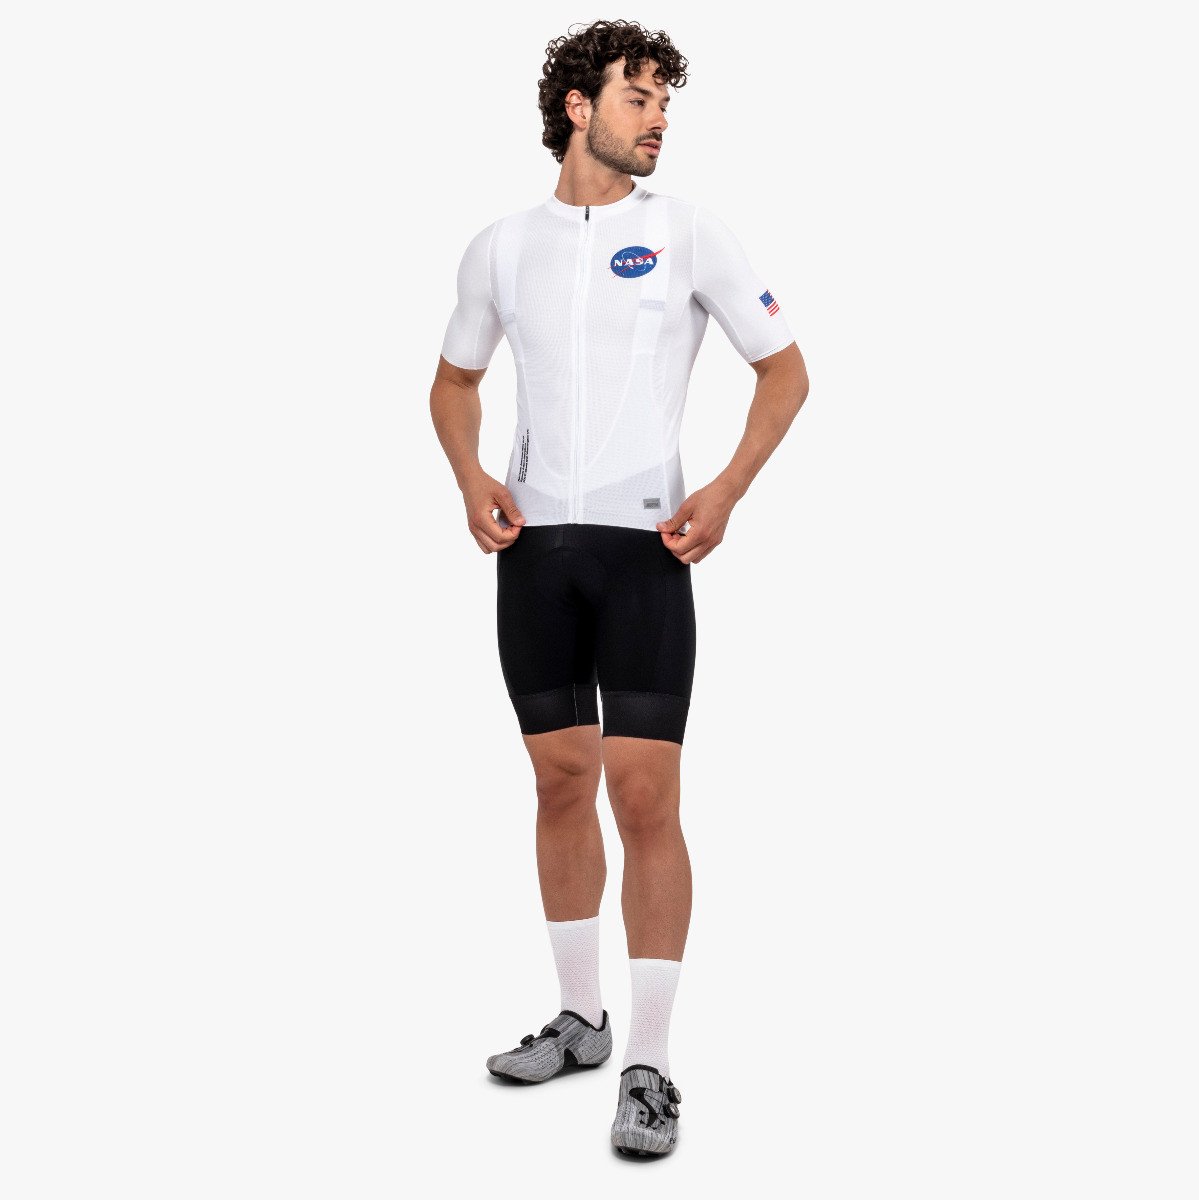 scicon space agency cycling clothing jersey nasa 17